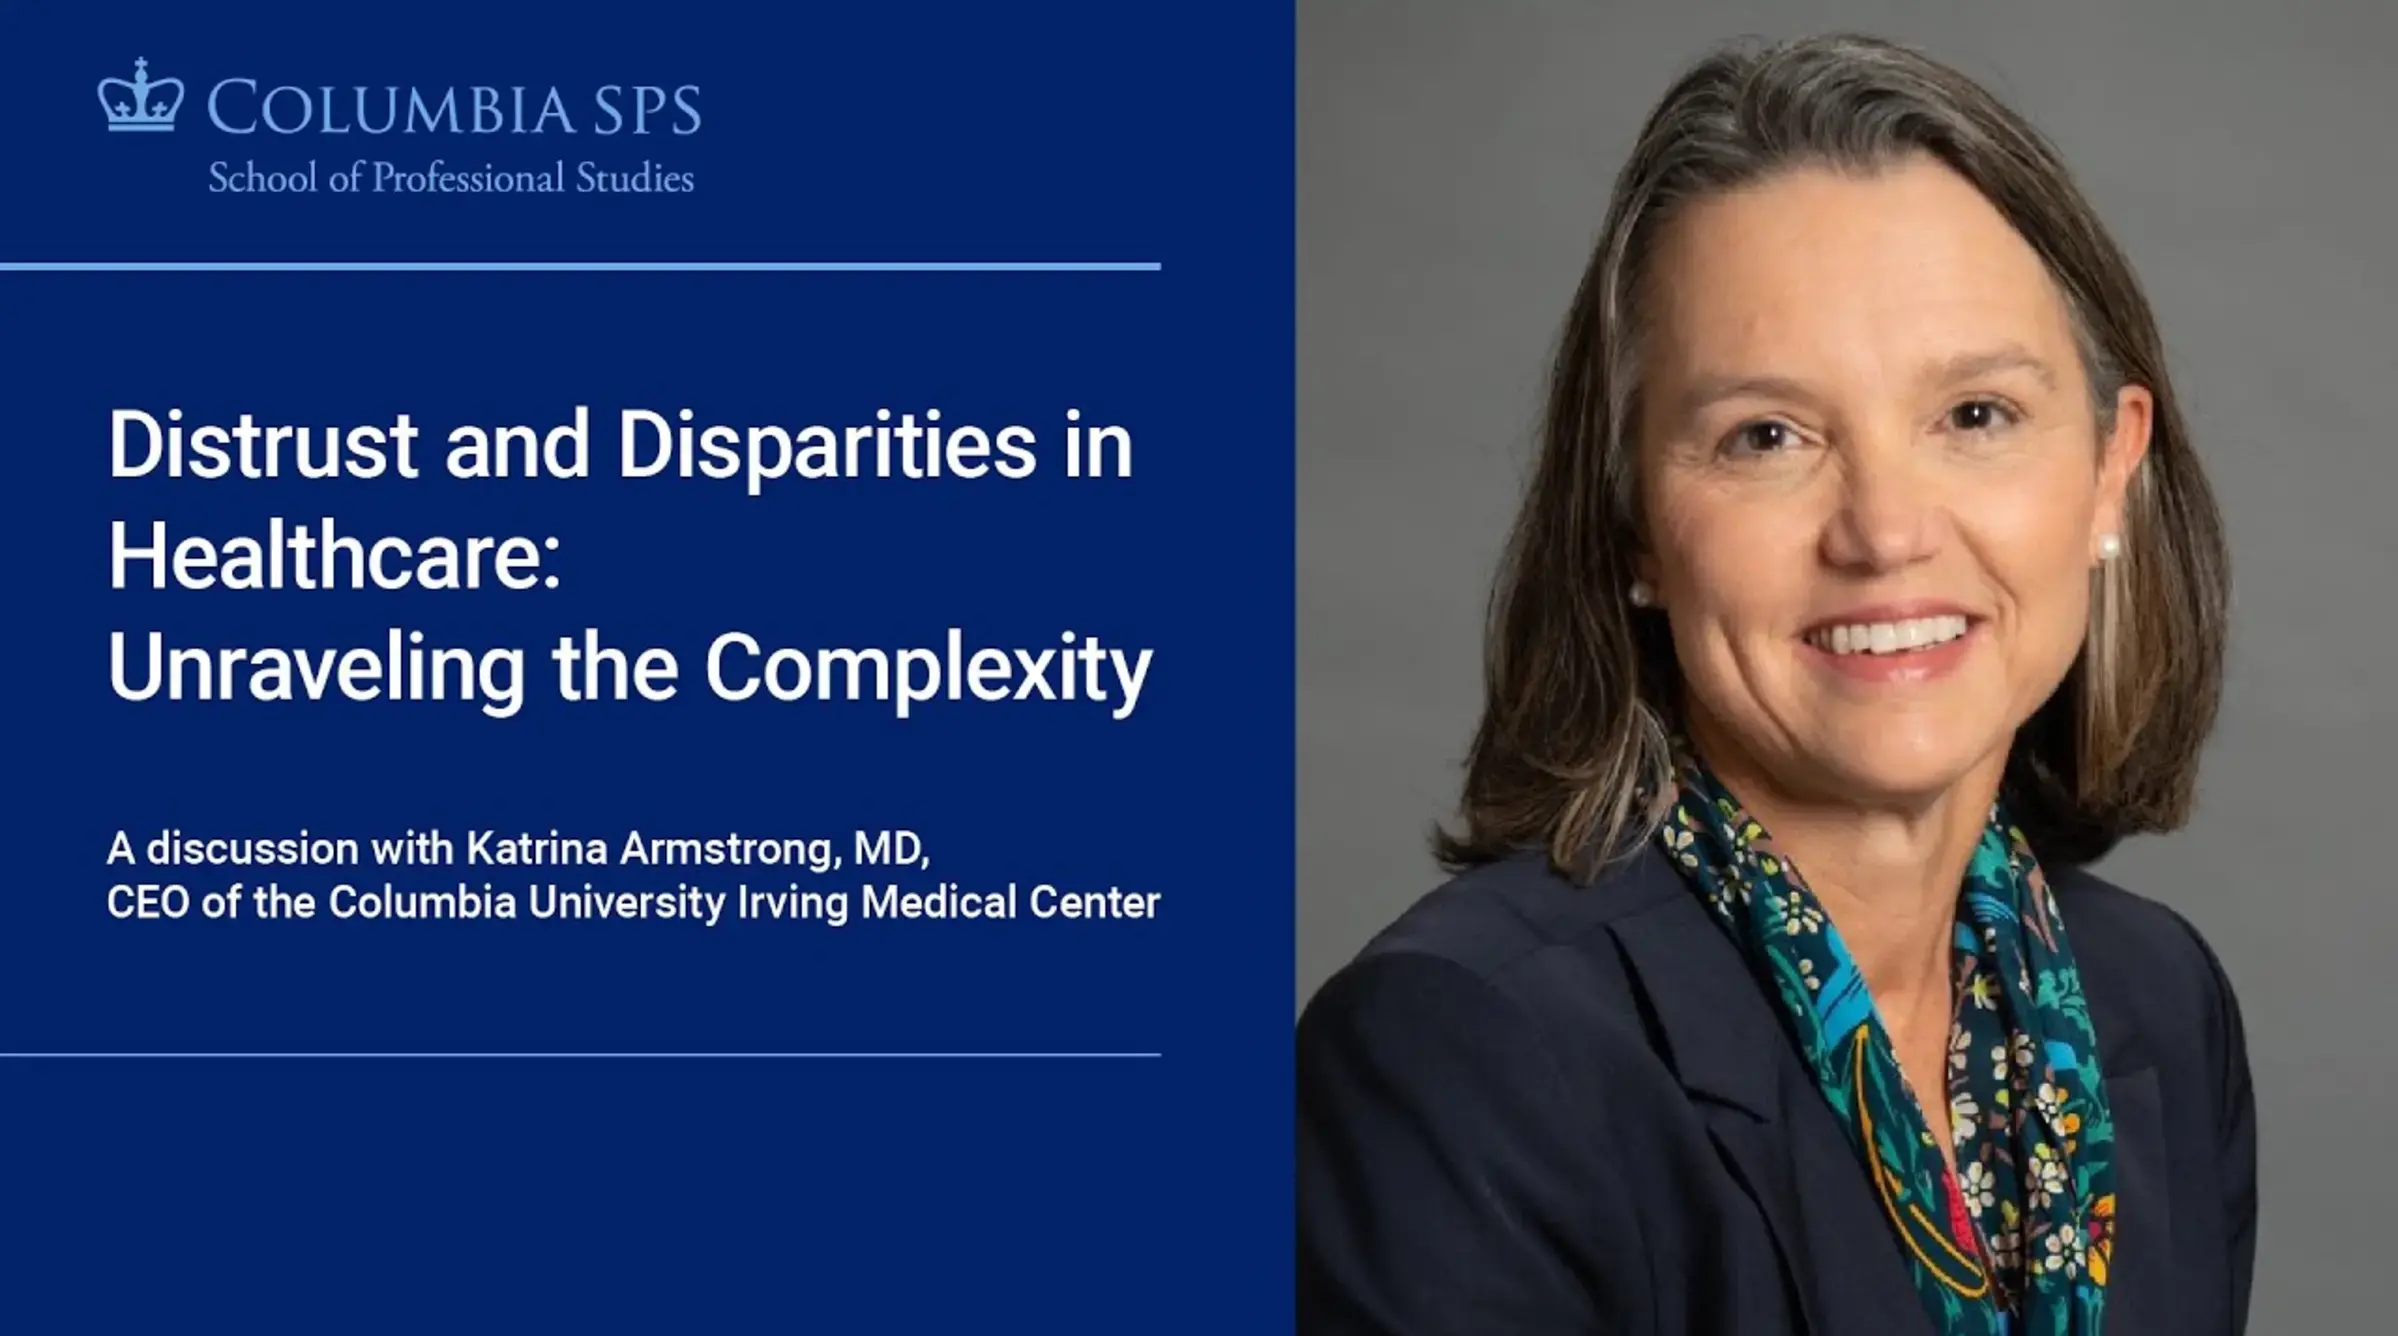 Distrust and Disparities in Healthcare: Unraveling the Complexity